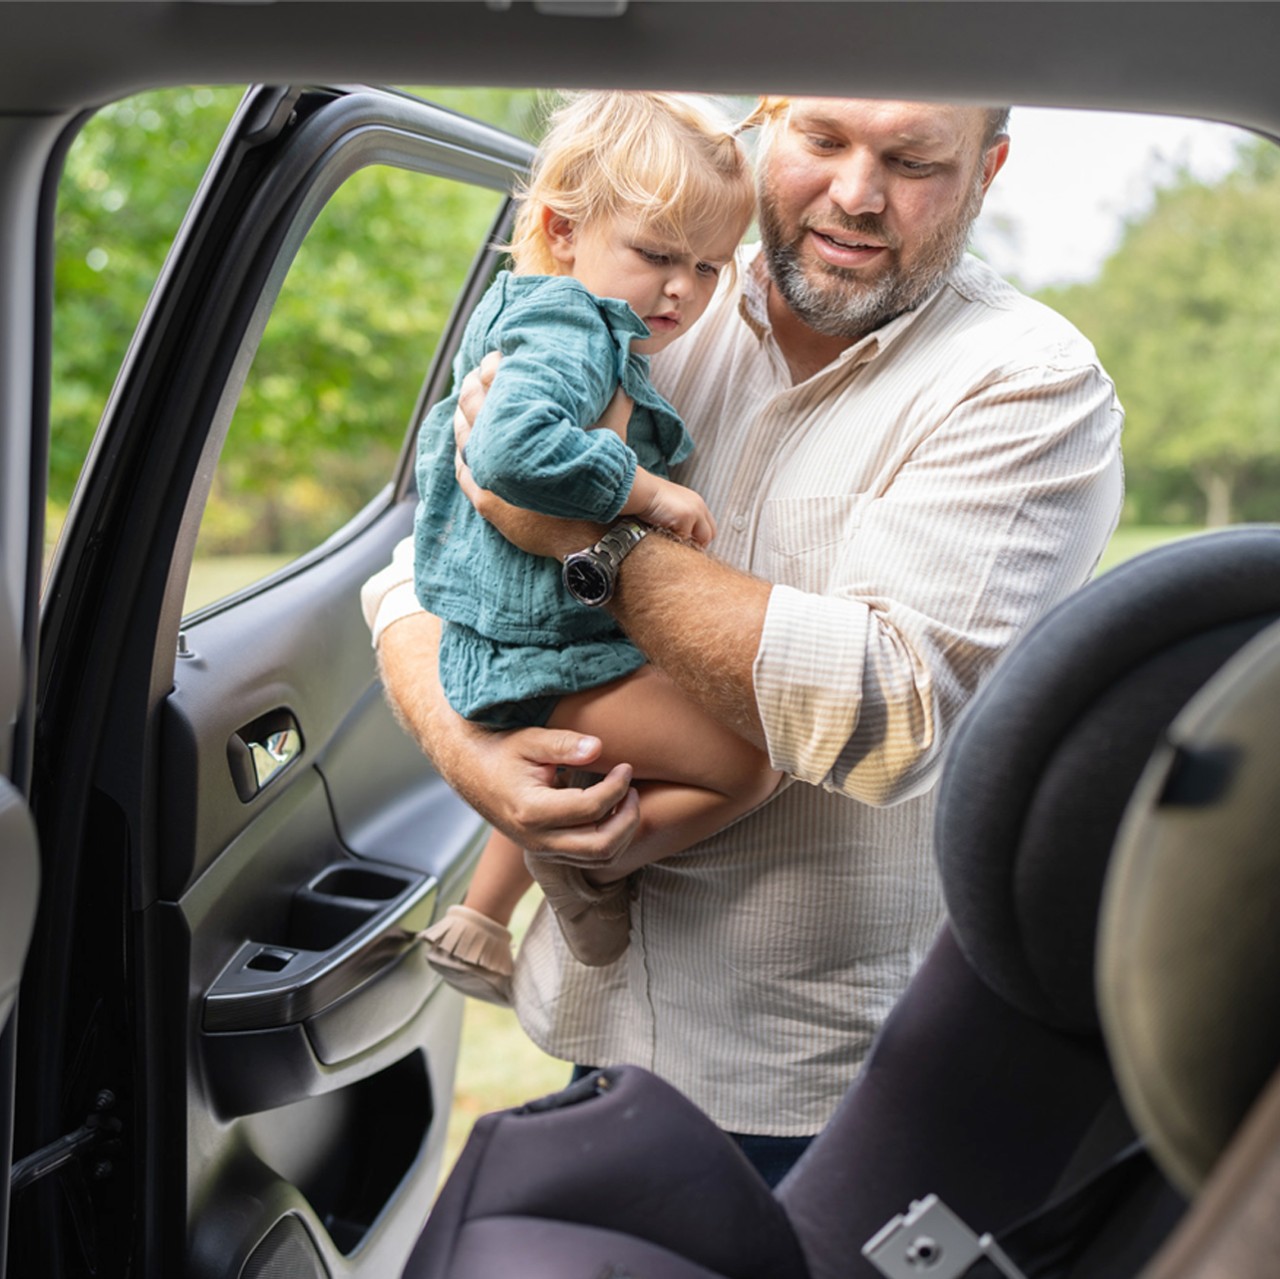 Dad loading child into rear car seat.